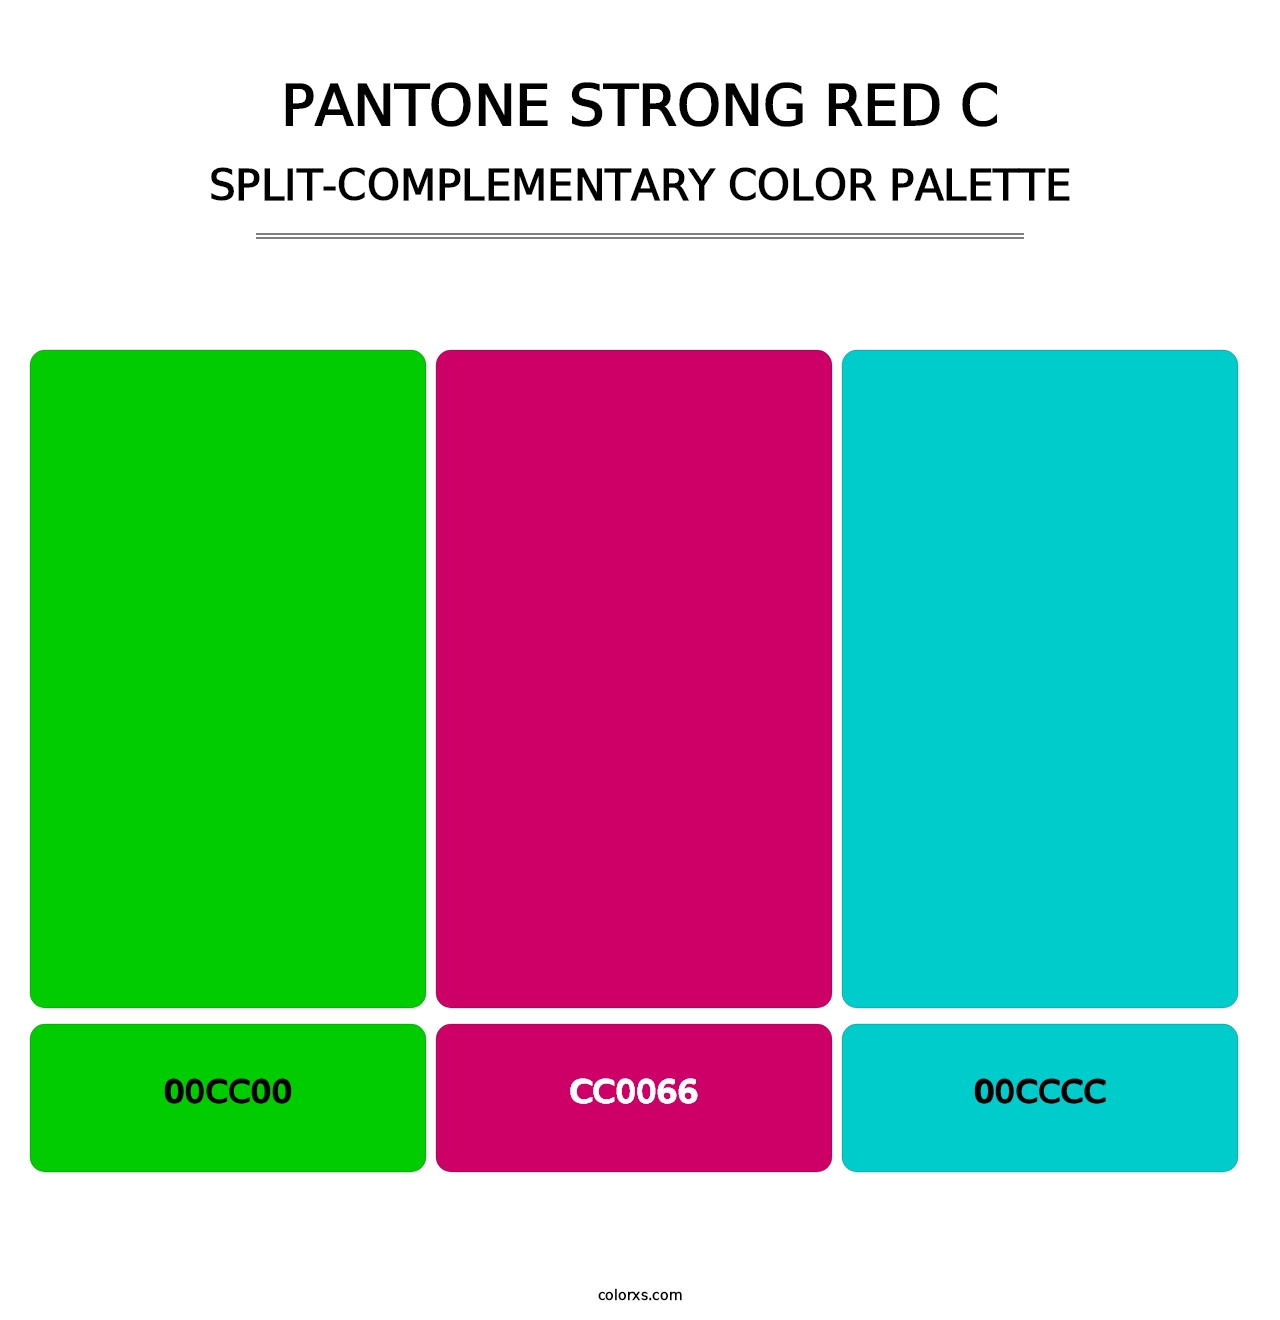 PANTONE Strong Red C - Split-Complementary Color Palette